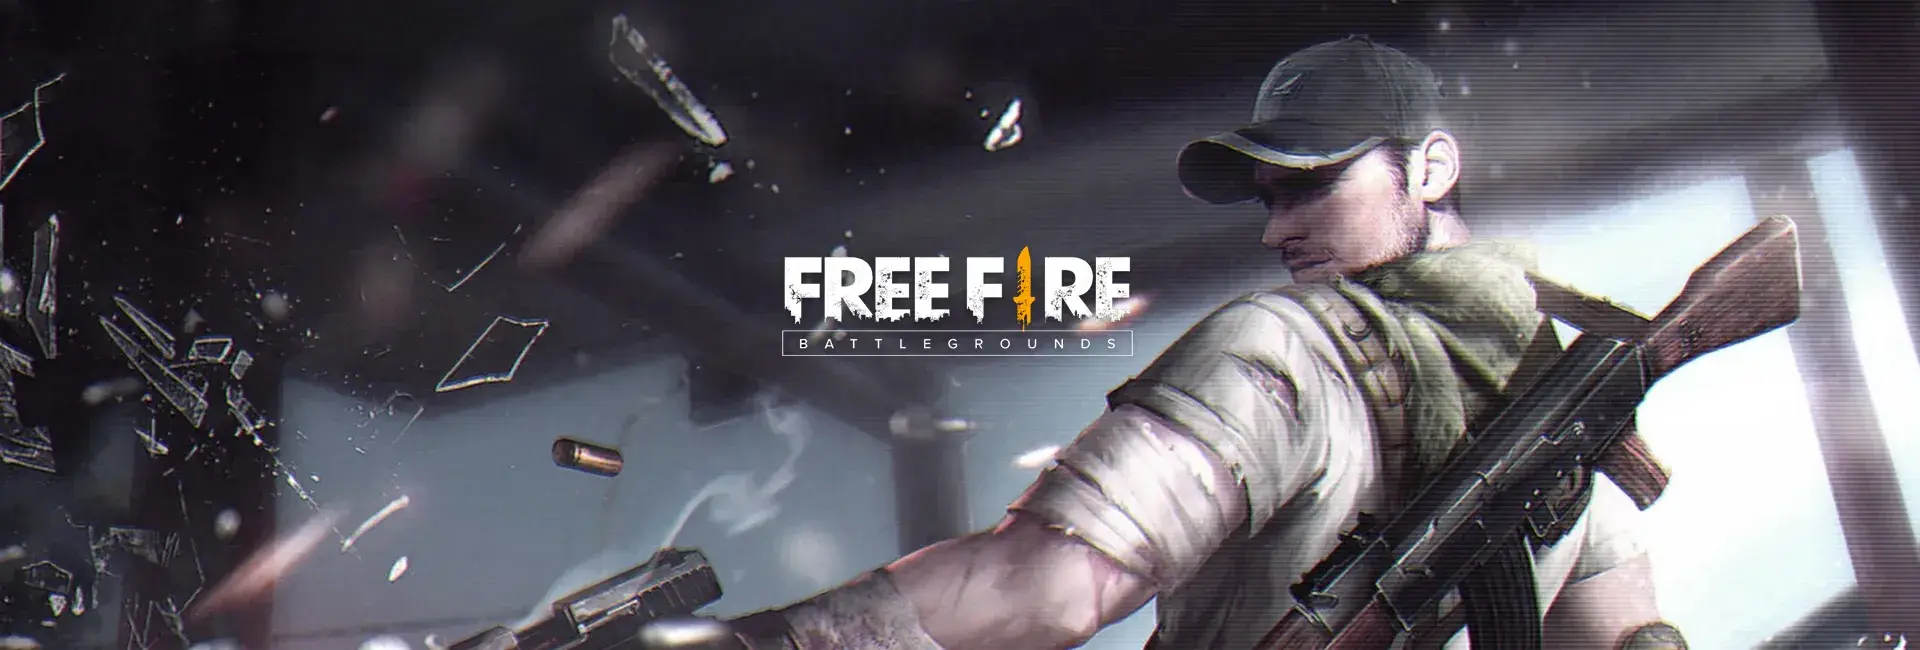 Free Fire India Top Up, Cheapest & Fastest Delivery